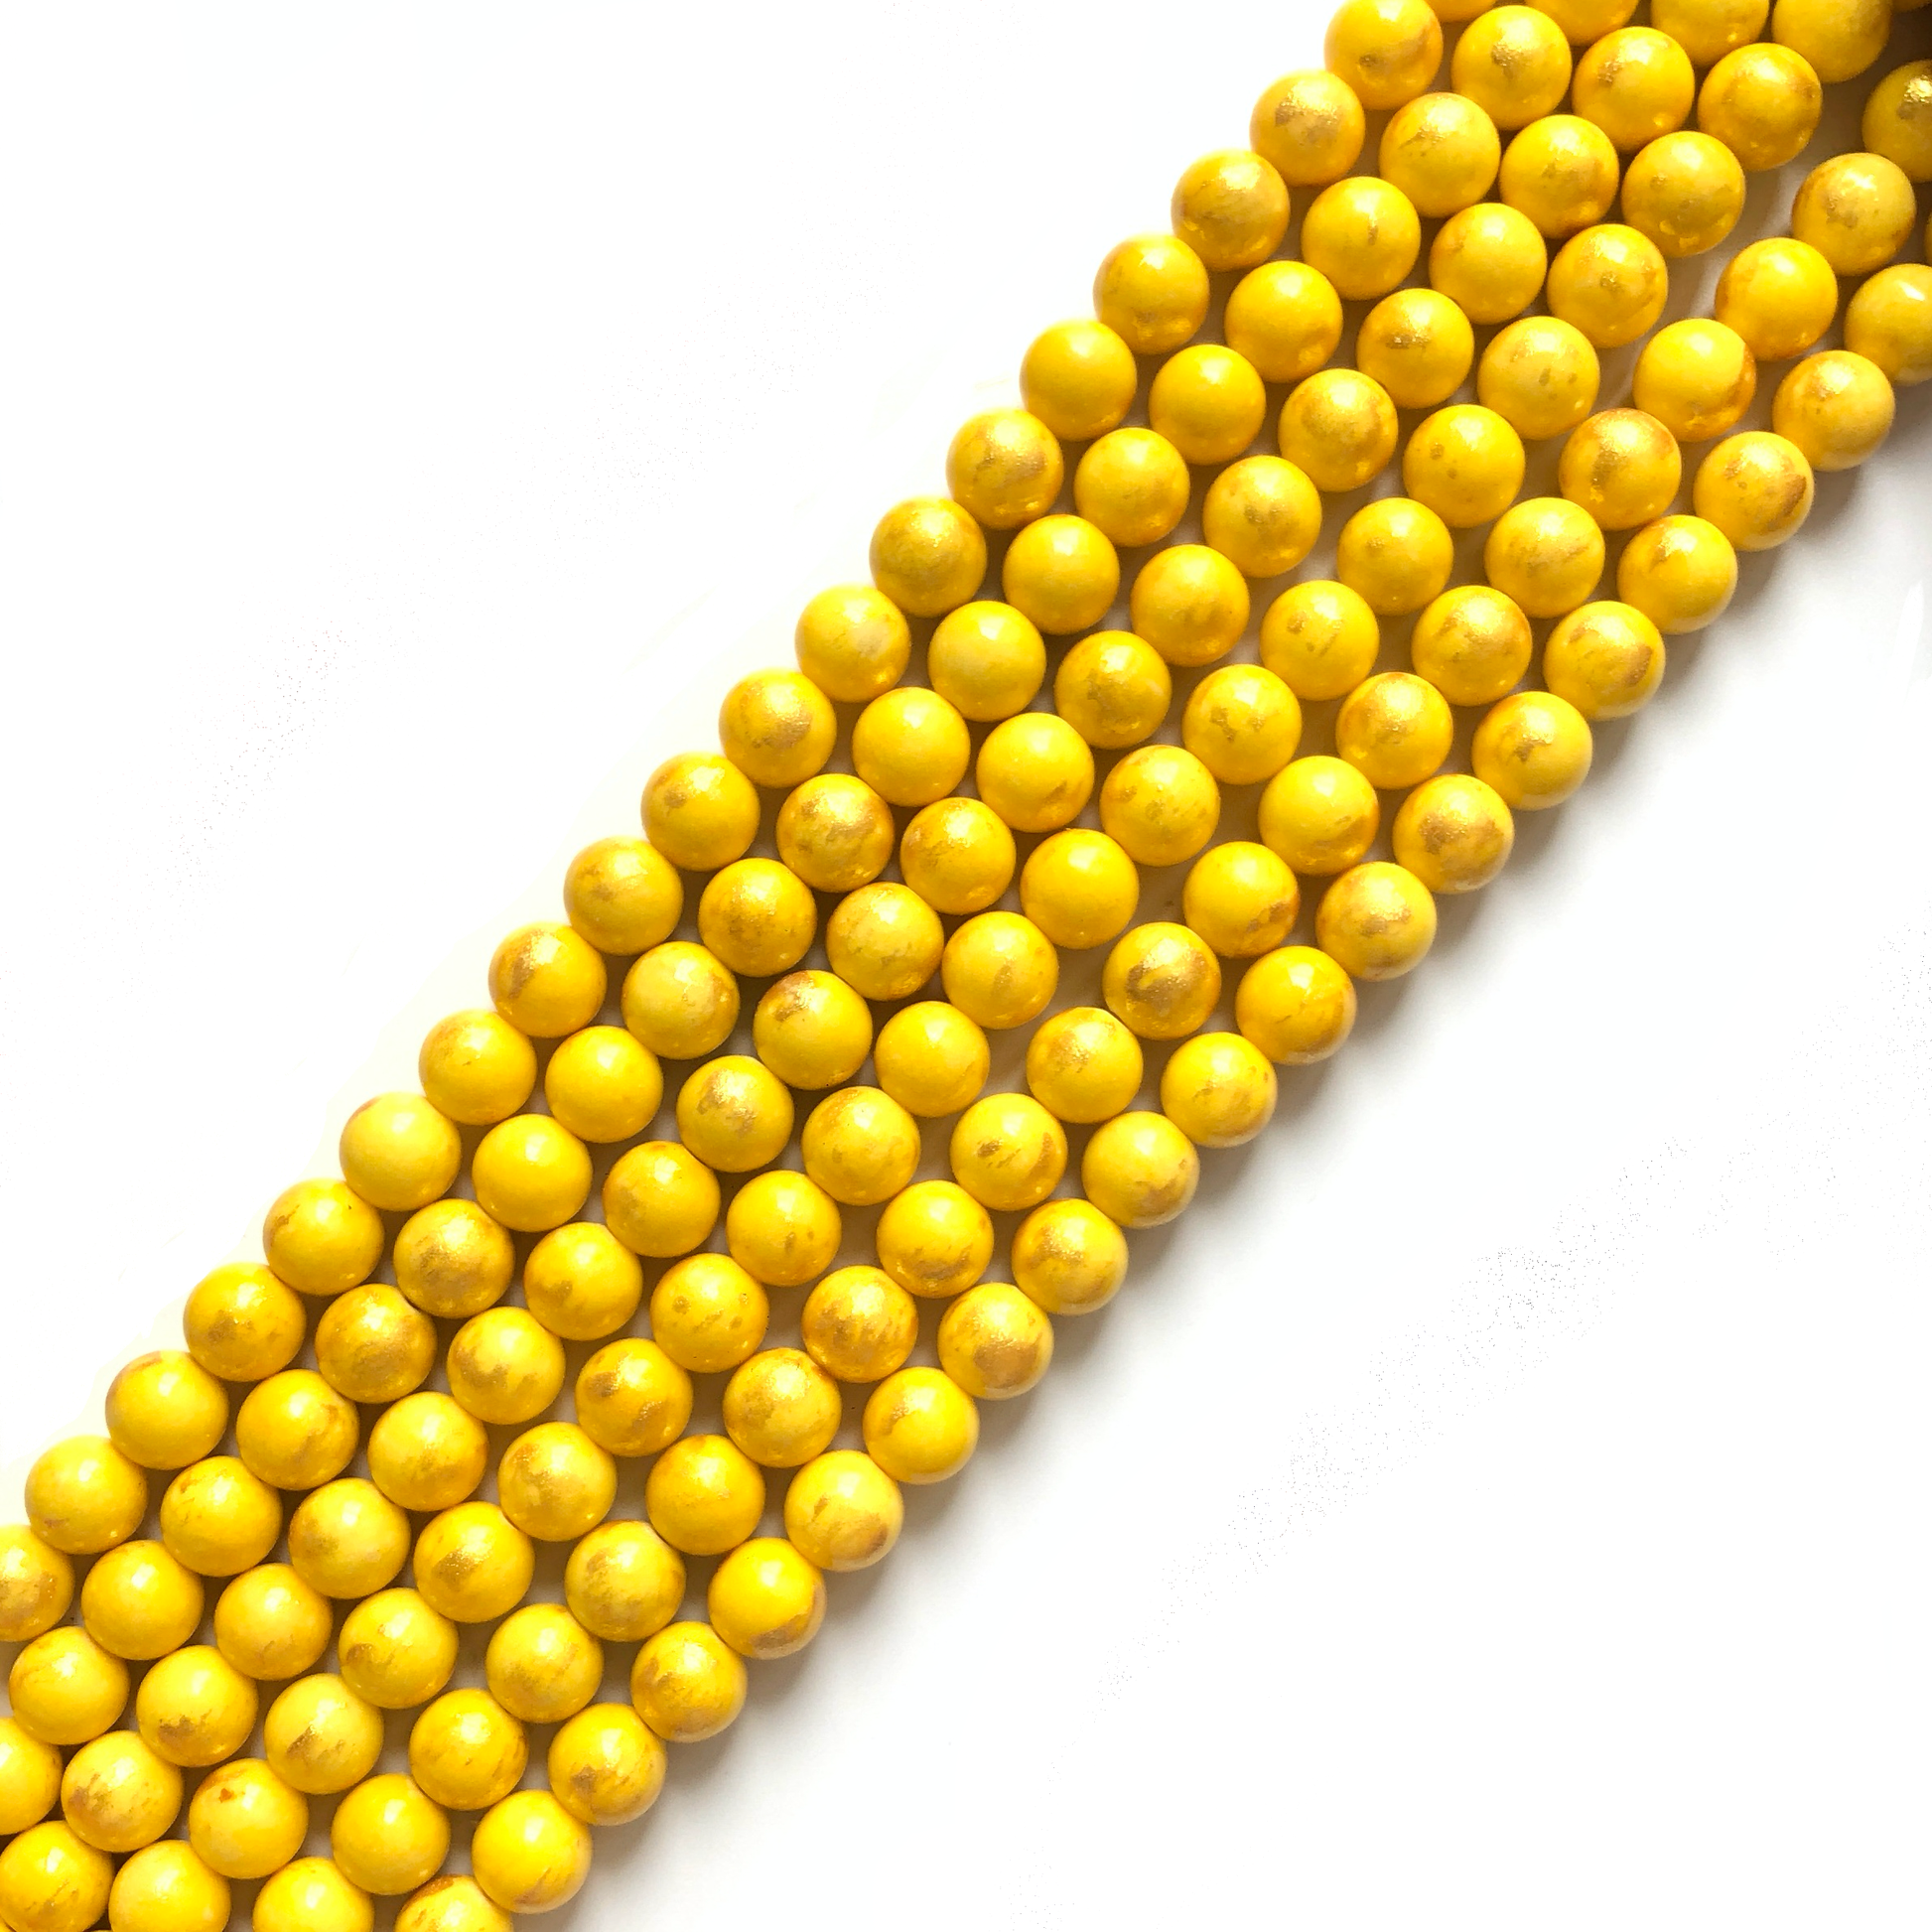 2 Strands/lot 8mm, 10mm Yellow Gold Plated Jade Round Stone Beads Stone Beads 8mm Stone Beads Gold Plated Jade Beads Round Jade Beads Charms Beads Beyond